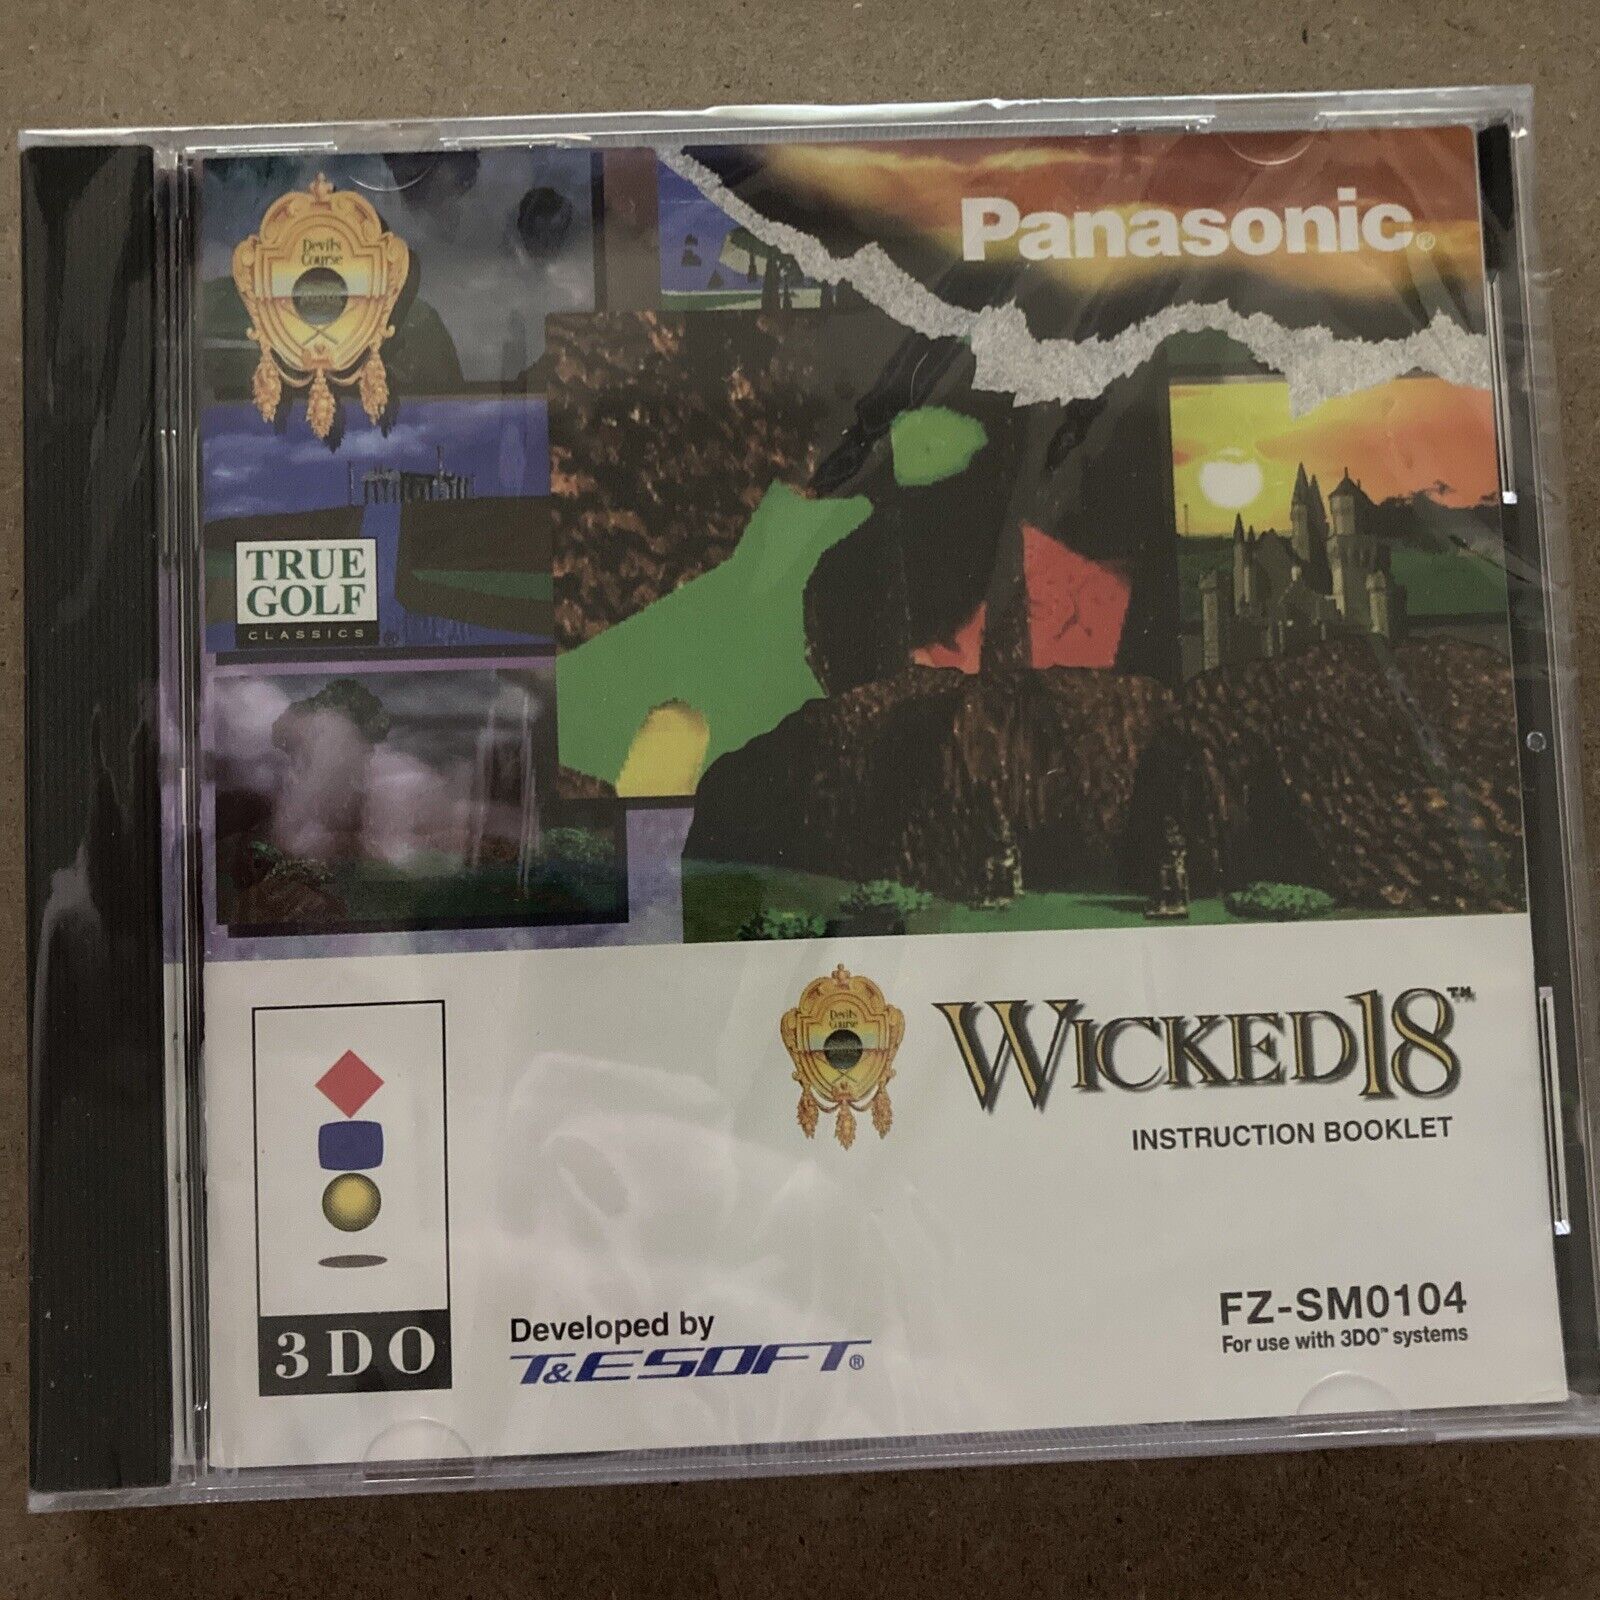 NEW Wicked 18 (3DO, 1994) Golf FACTORY SEALED